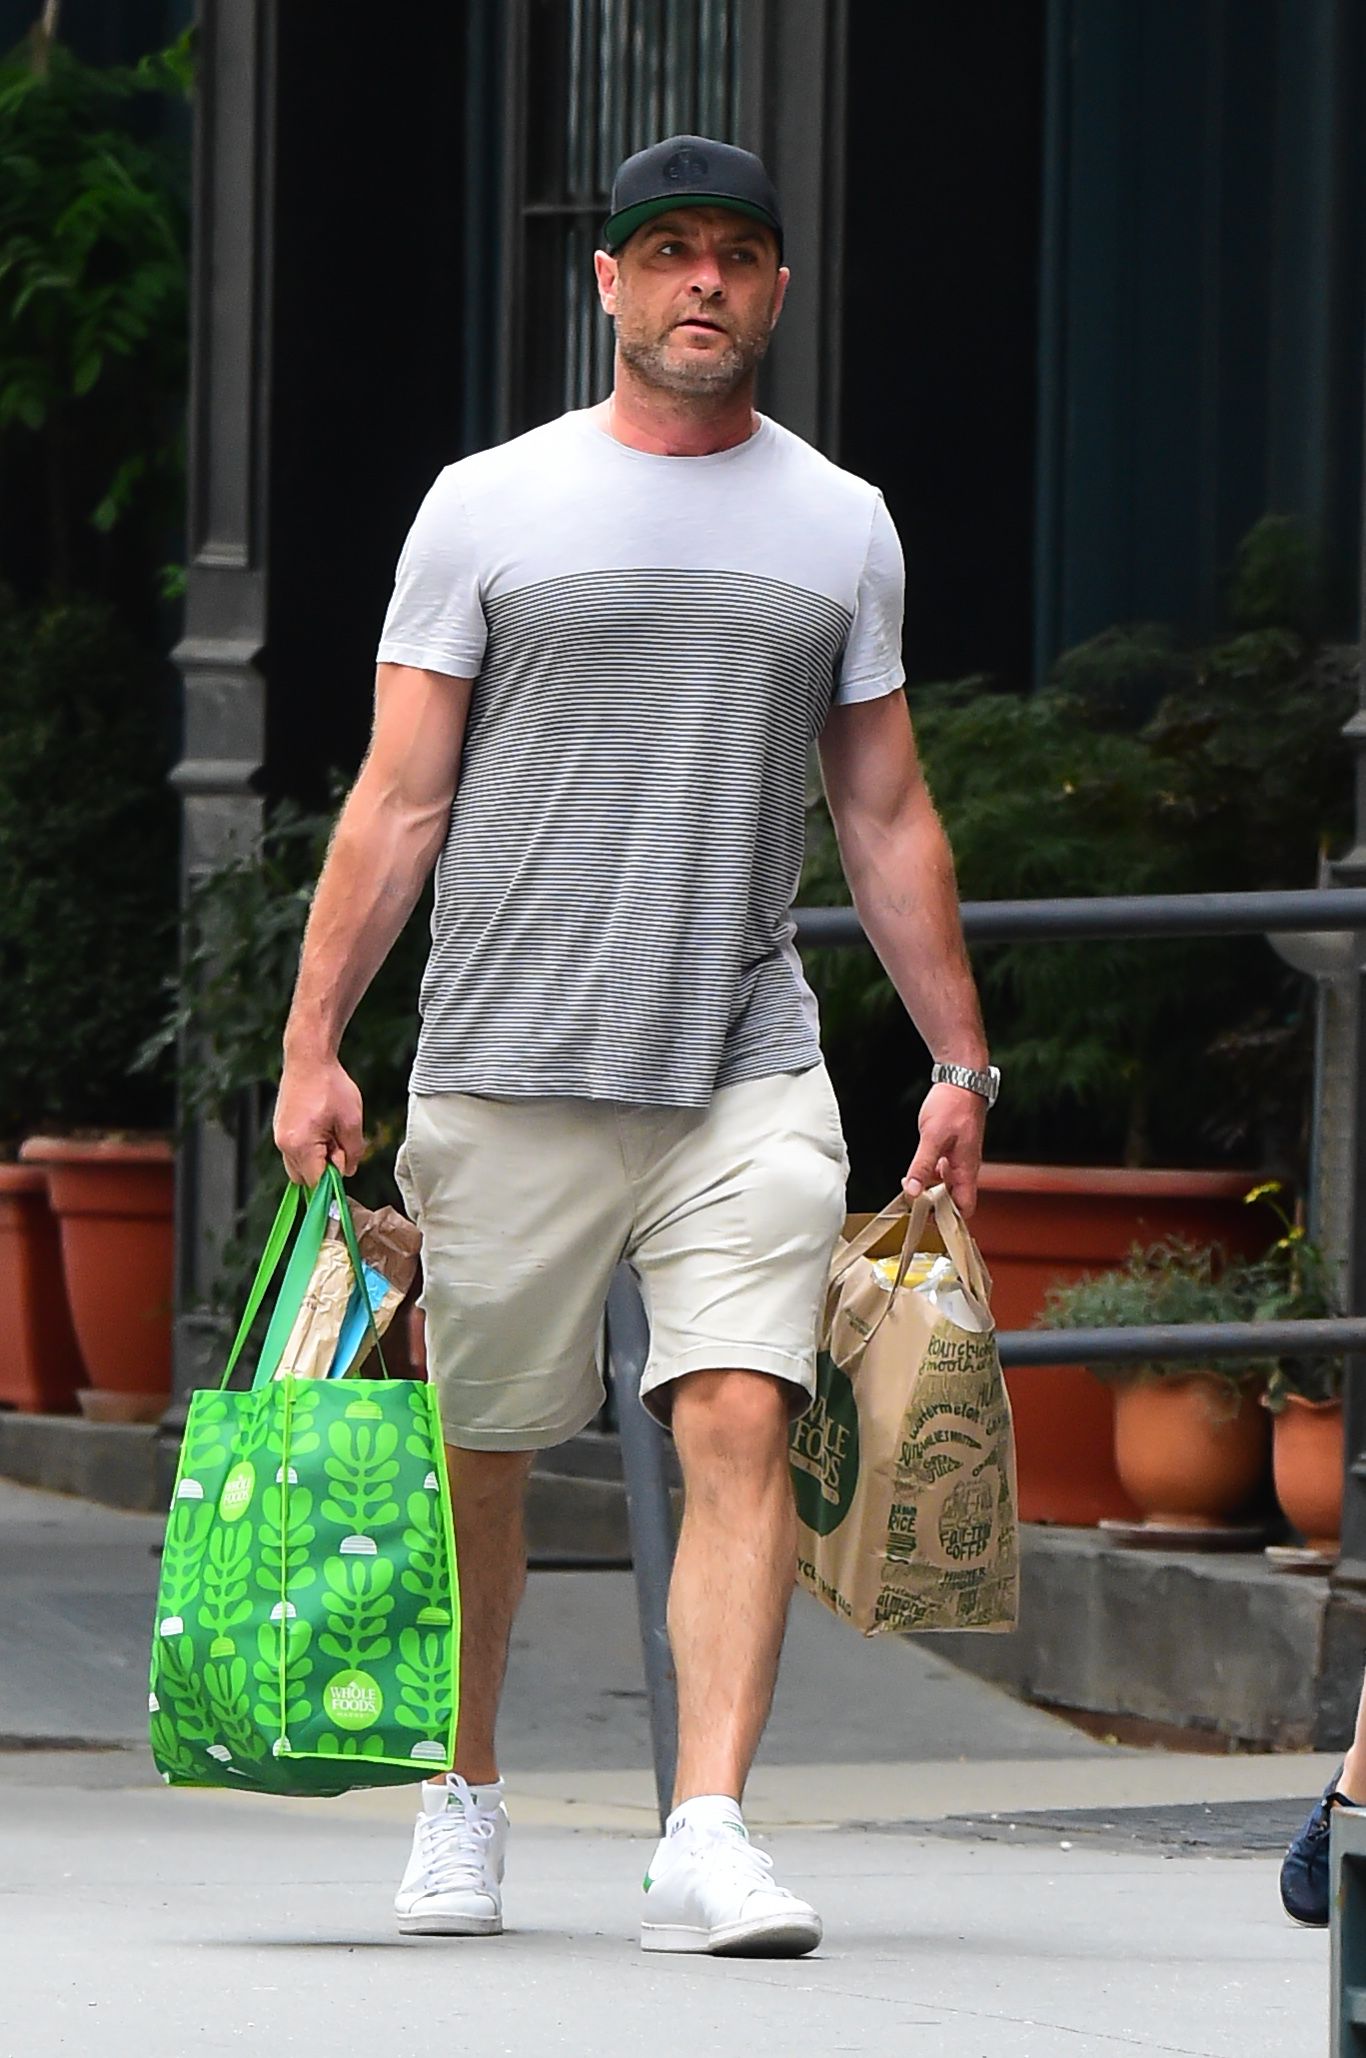 Totes and Shopping Bags for Men